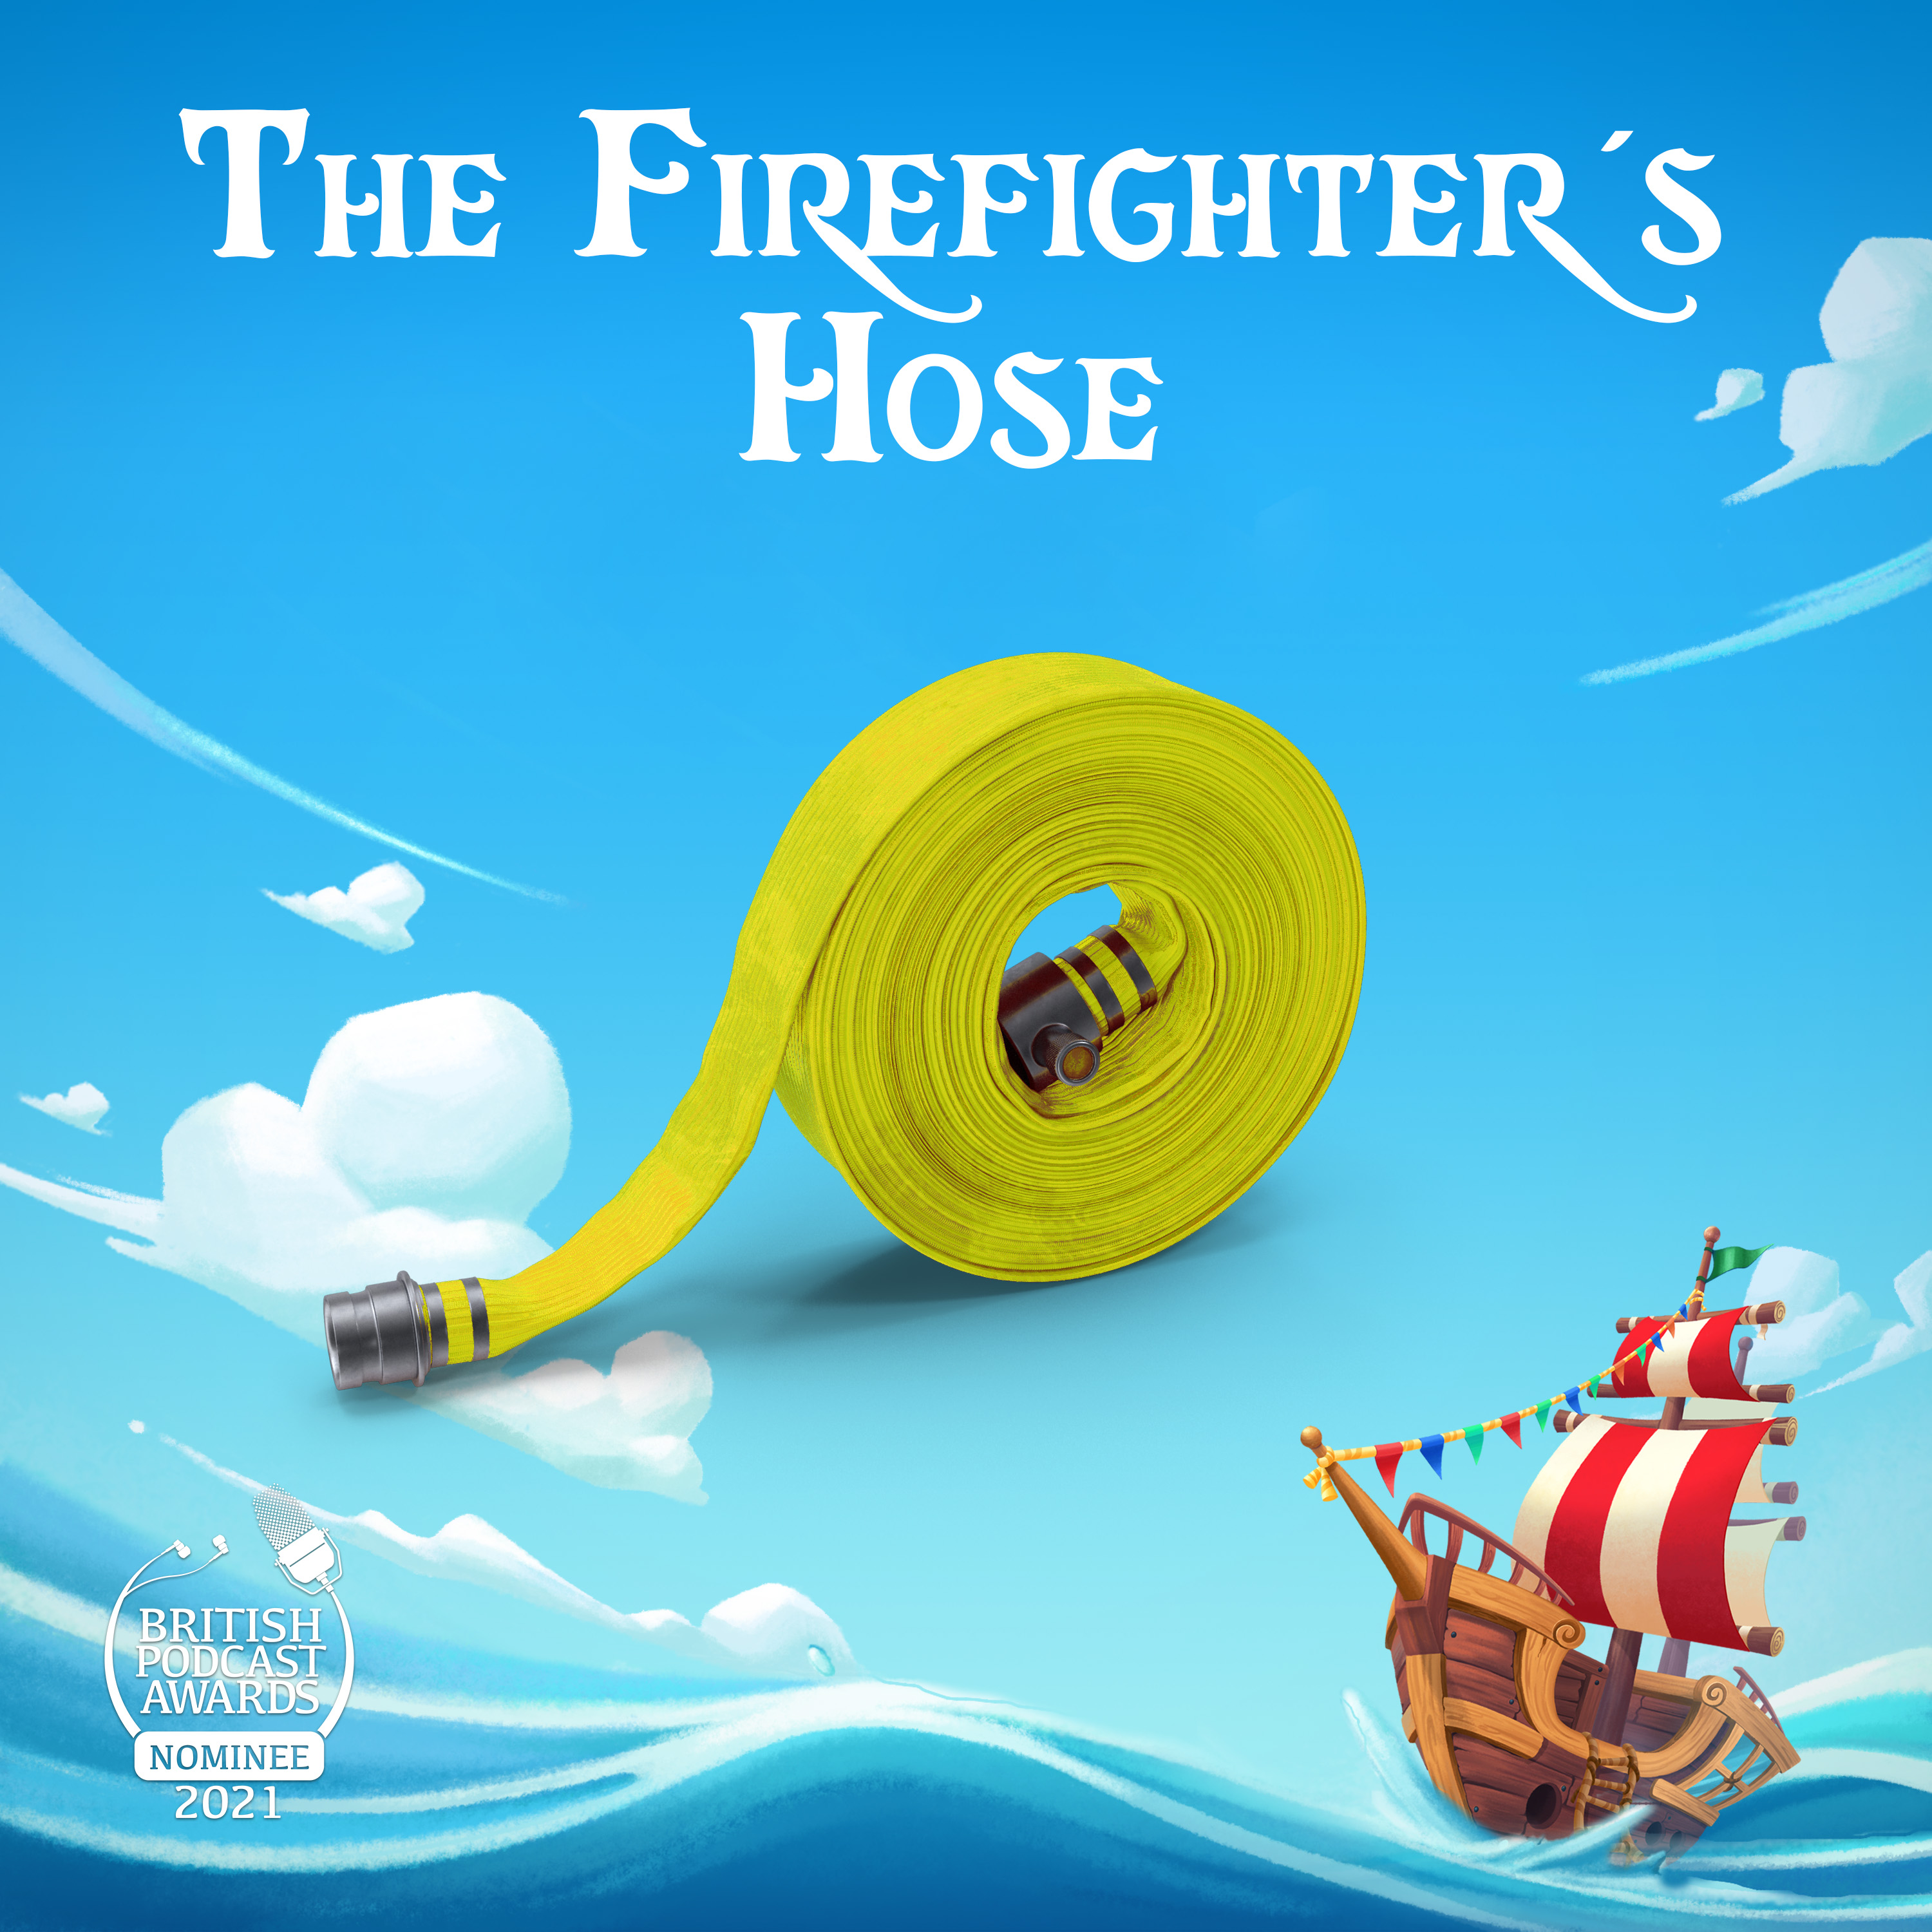 The Firefighter's Hose